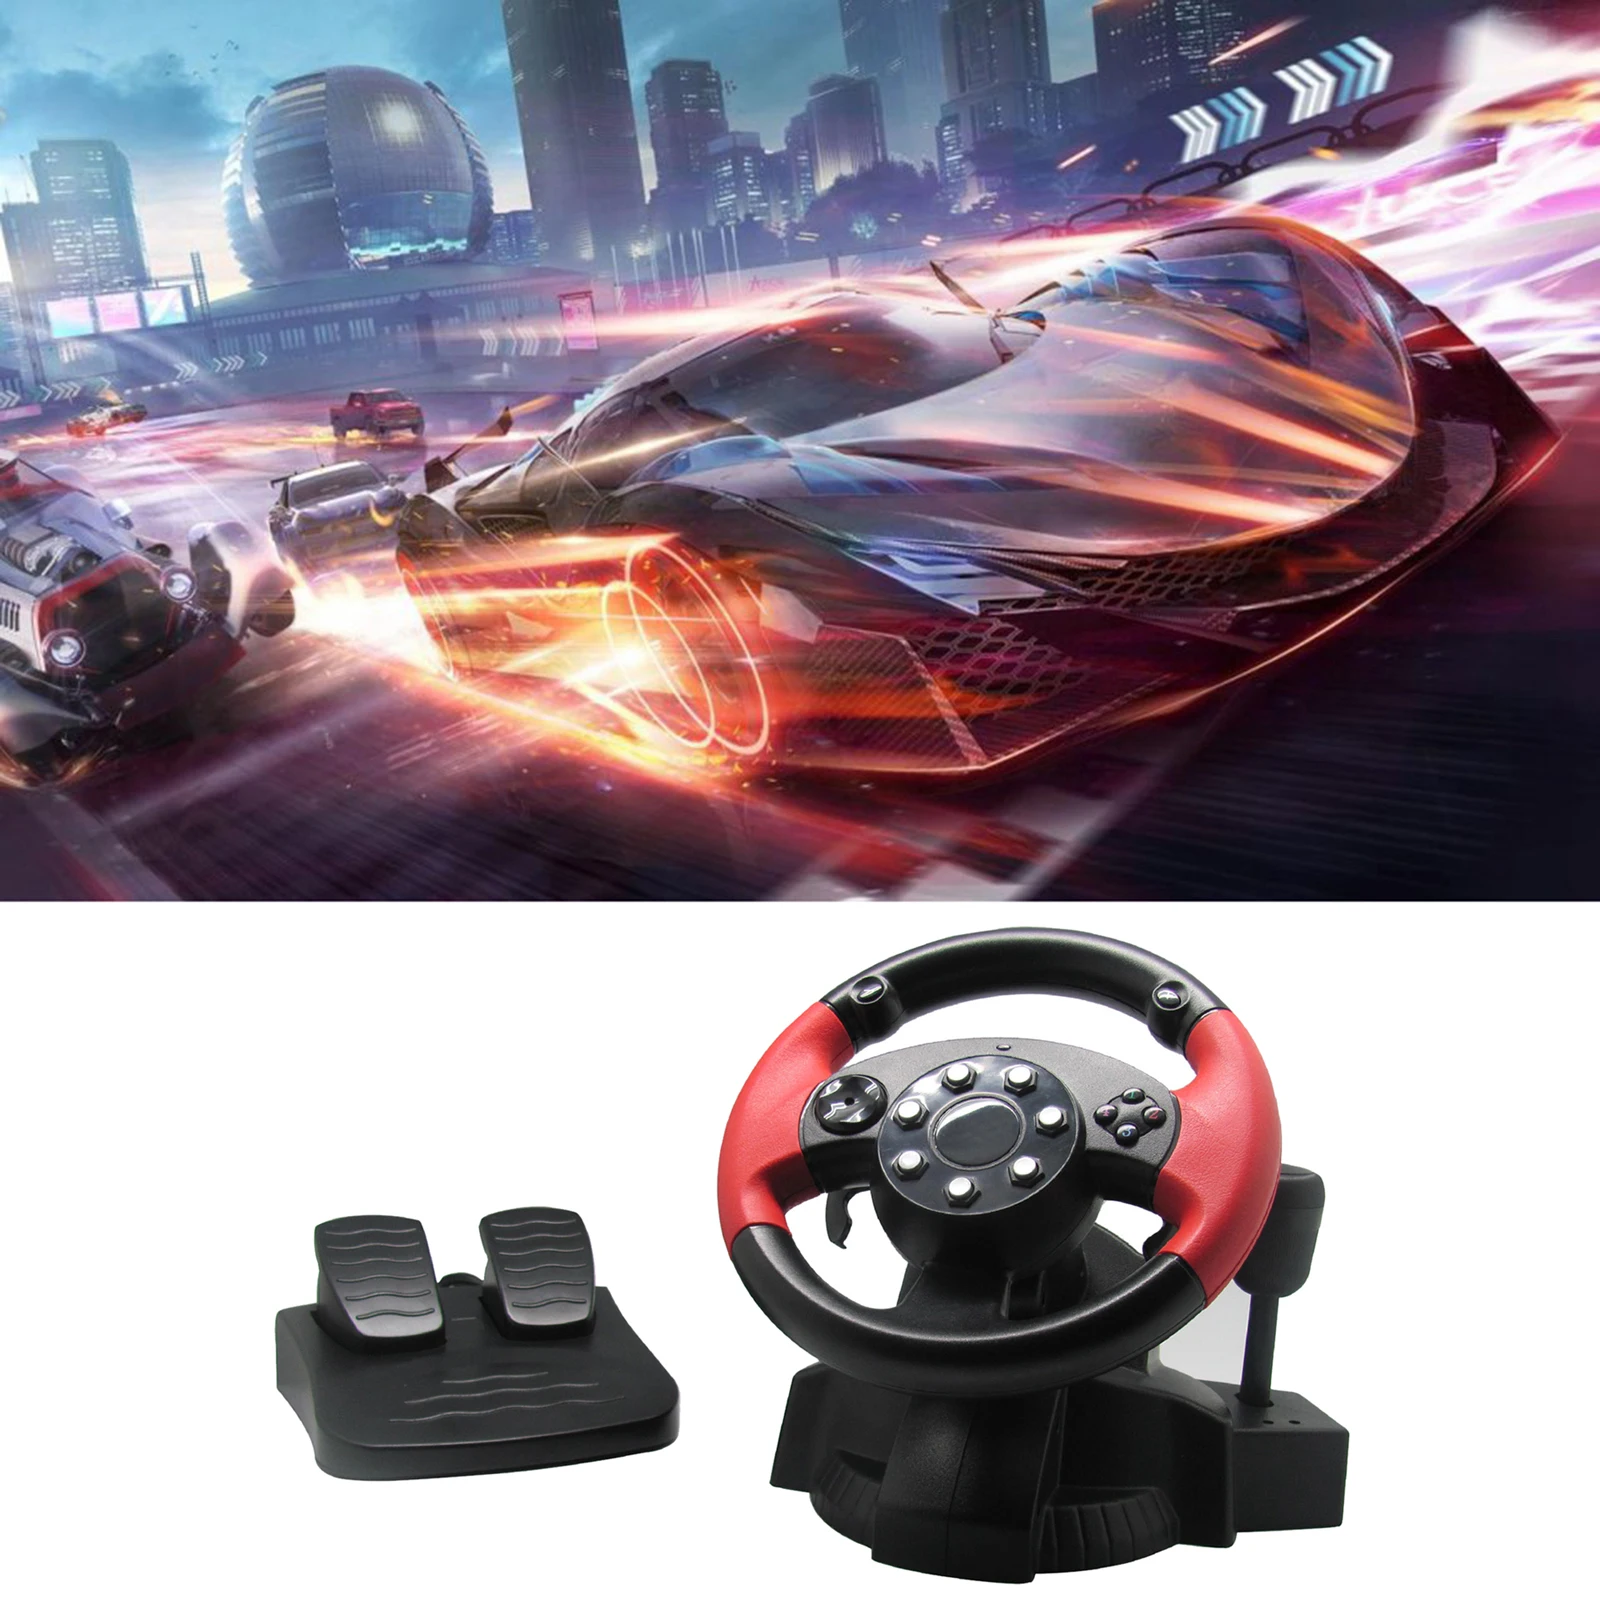 PC Racing Wheel, 200 Degree Universal USB Car Race Steering Wheel with Pedals for PS3, PS2